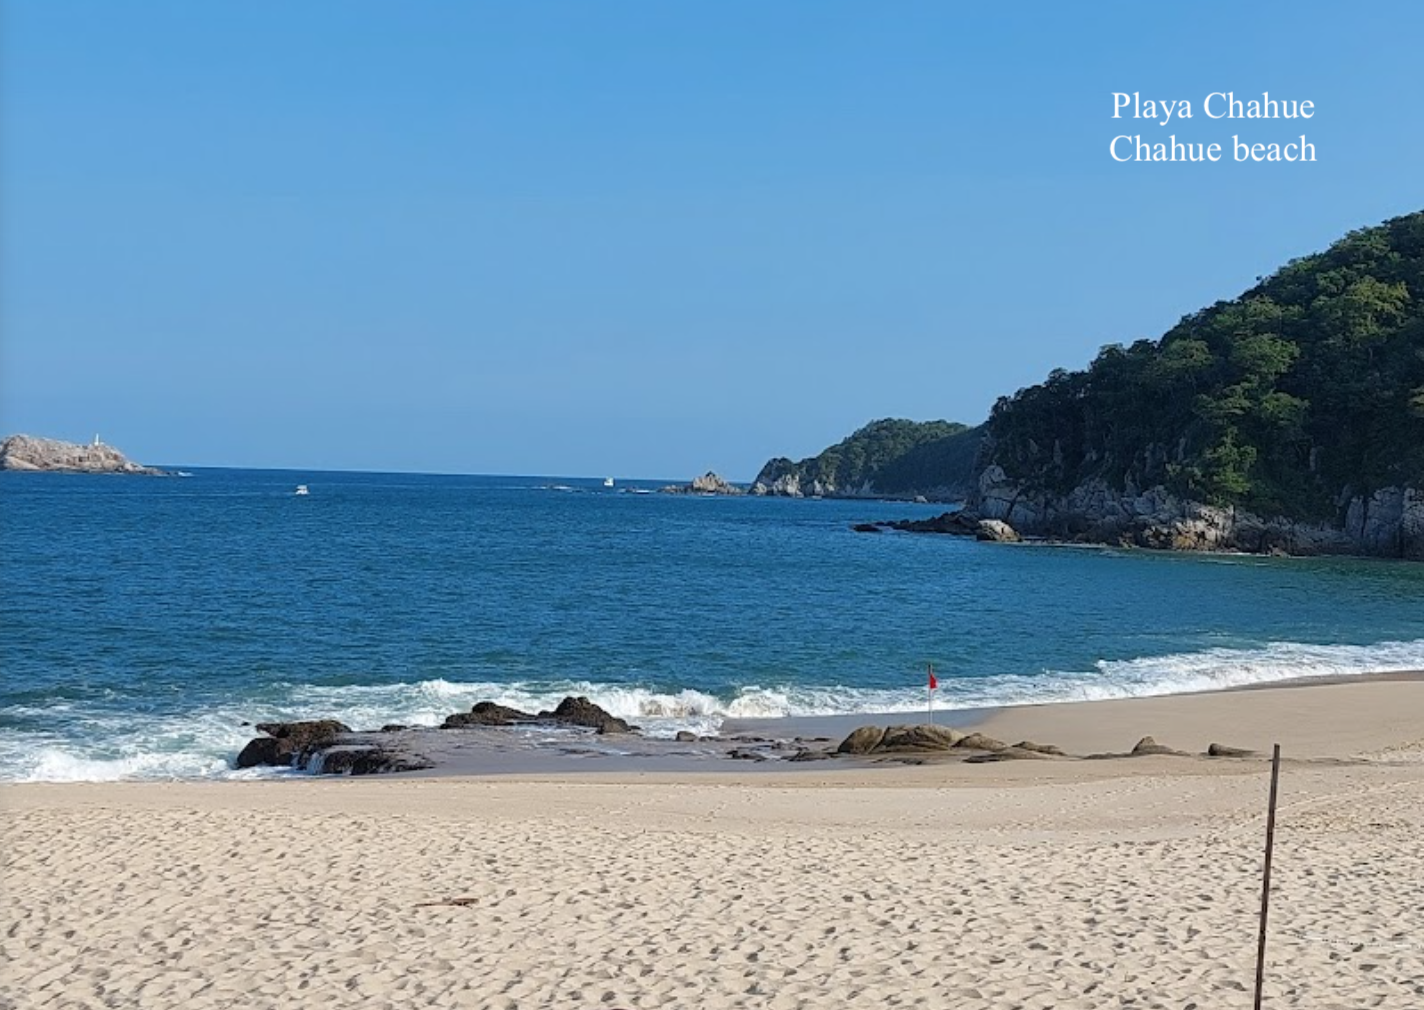 Land of 309 m2 in petite gated community, for sale in Huatulco.